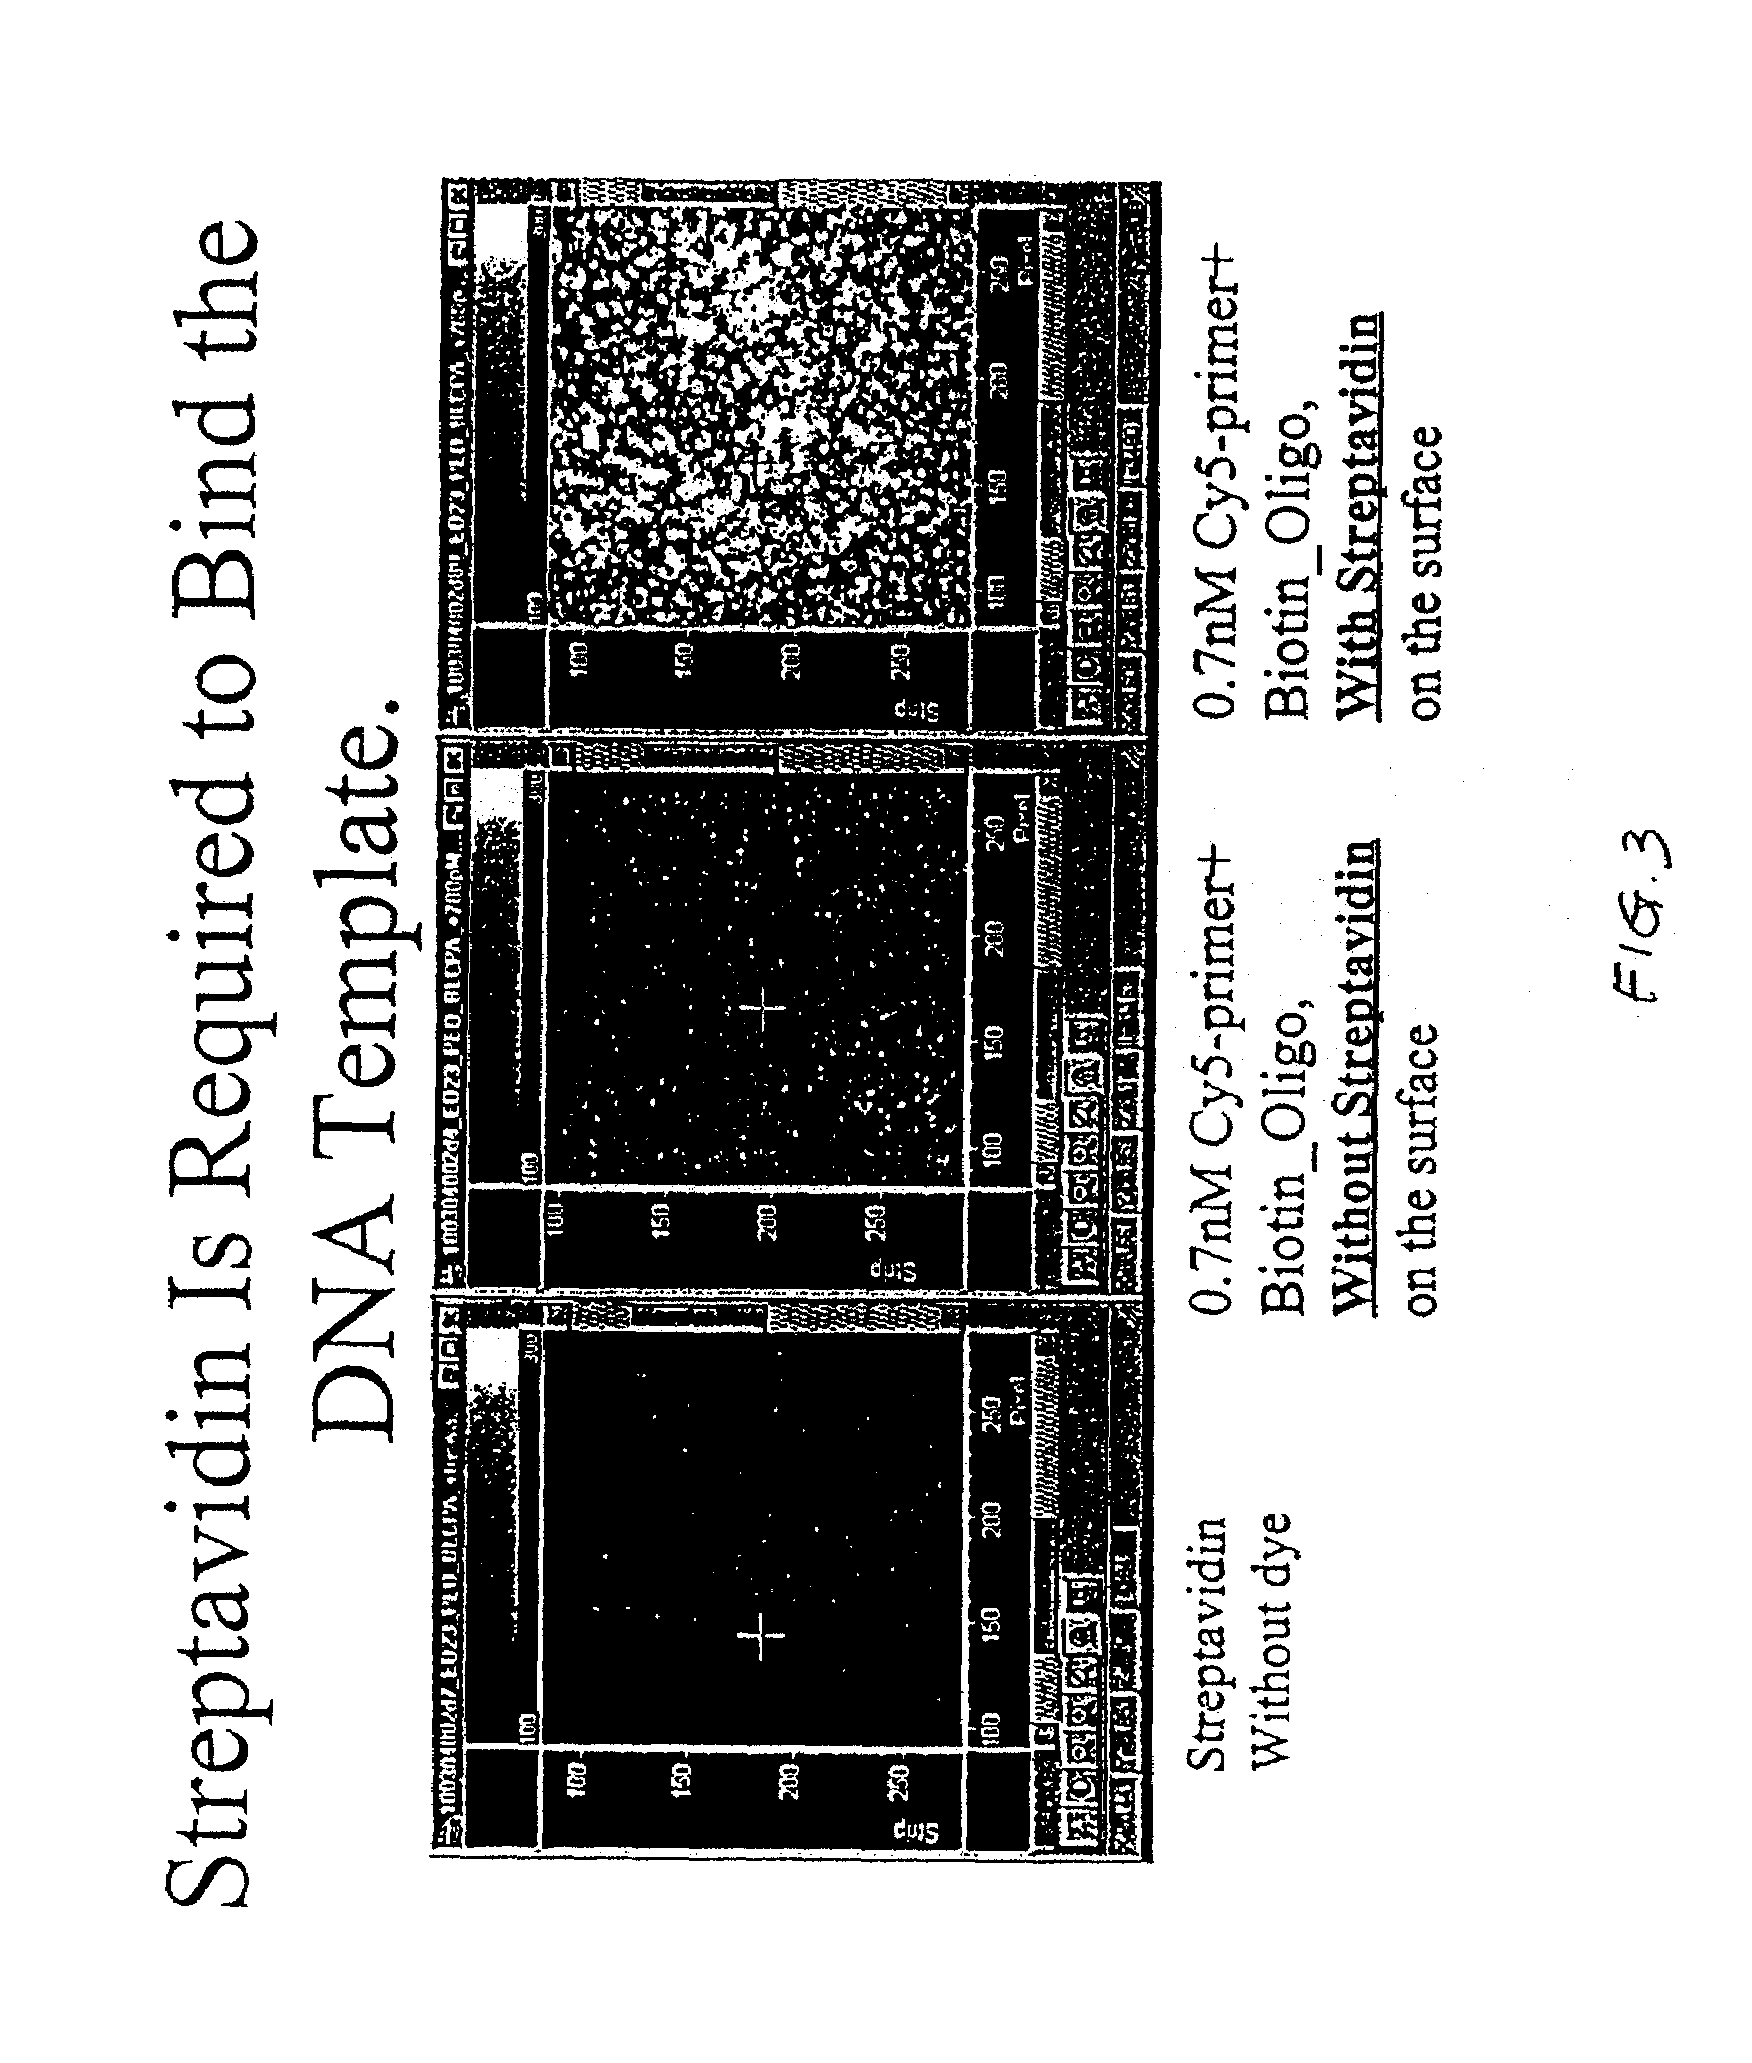 Methods and apparatus for analyzing polynucleotide sequences by asynchronous base extension